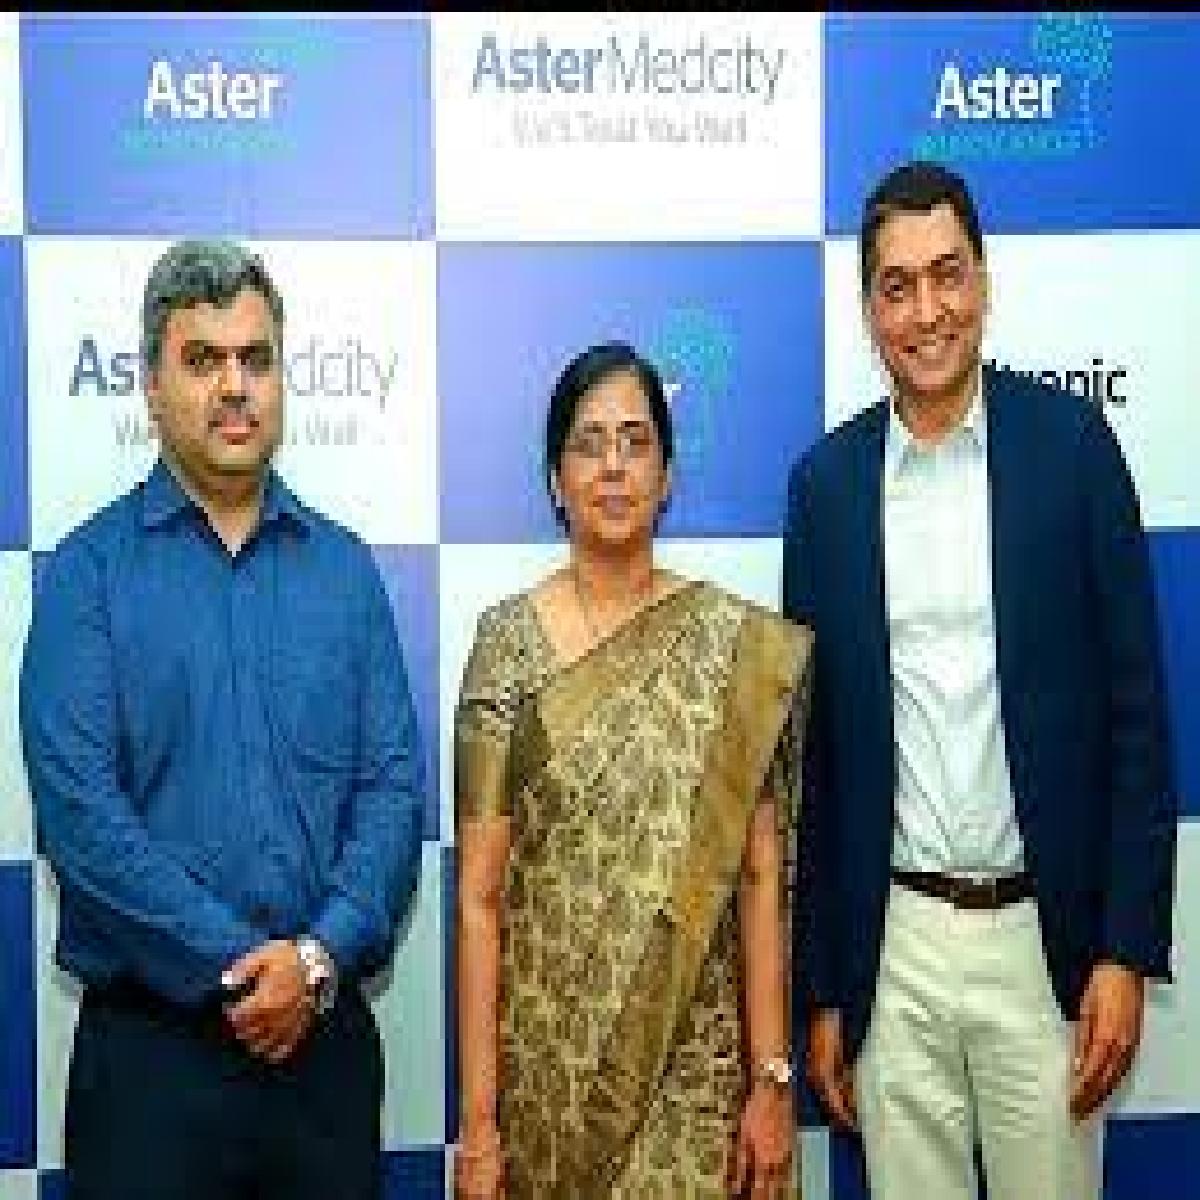 Aster Medcity Becomes the First Centre in South Asia to Introduce NeuroNav MER System Alpha Omega in Partnership with Medtronic for Deep Brain Stimulation DBS Therapy Done for Parkinson’s Disease Patients